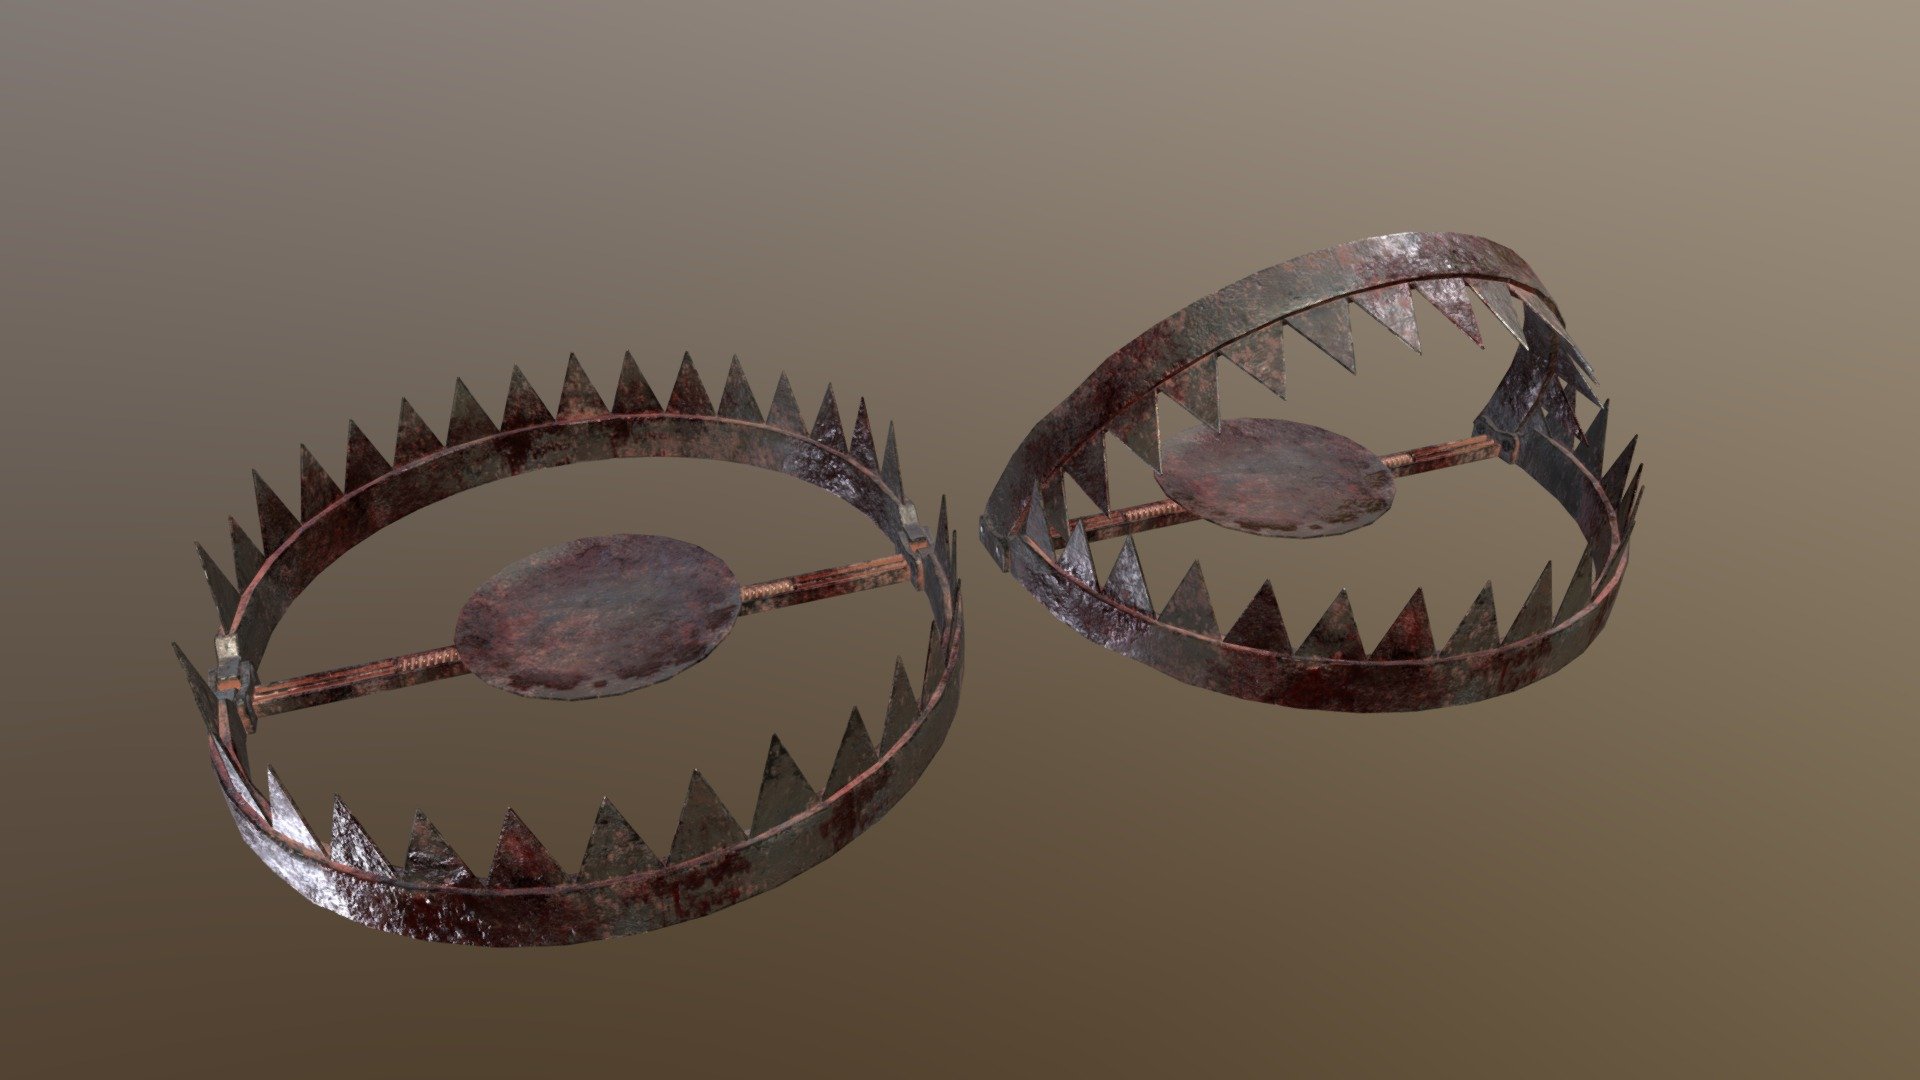 Bloody Bear Traps 3D Model. This model contains the Bloody Bear Traps itself 

All modeled in Maya, textured with Substance Painter.

The model was built to scale and is UV unwrapped properly. Contains a 4K and 2K texture set.  

⦁   4584 tris. 

⦁   Contains: .FBX .OBJ and .DAE

⦁   Model has clean topology. No Ngons.

⦁   Built to scale

⦁   Unwrapped UV Map

⦁   4K Texture set

⦁   High quality details

⦁   Based on real life references

⦁   Renders done in Marmoset Toolbag

Polycount: 

Verts 2628

Edges 5232 

Faces 2644

Tris 4584

If you have any questions please feel free to ask me 3d model